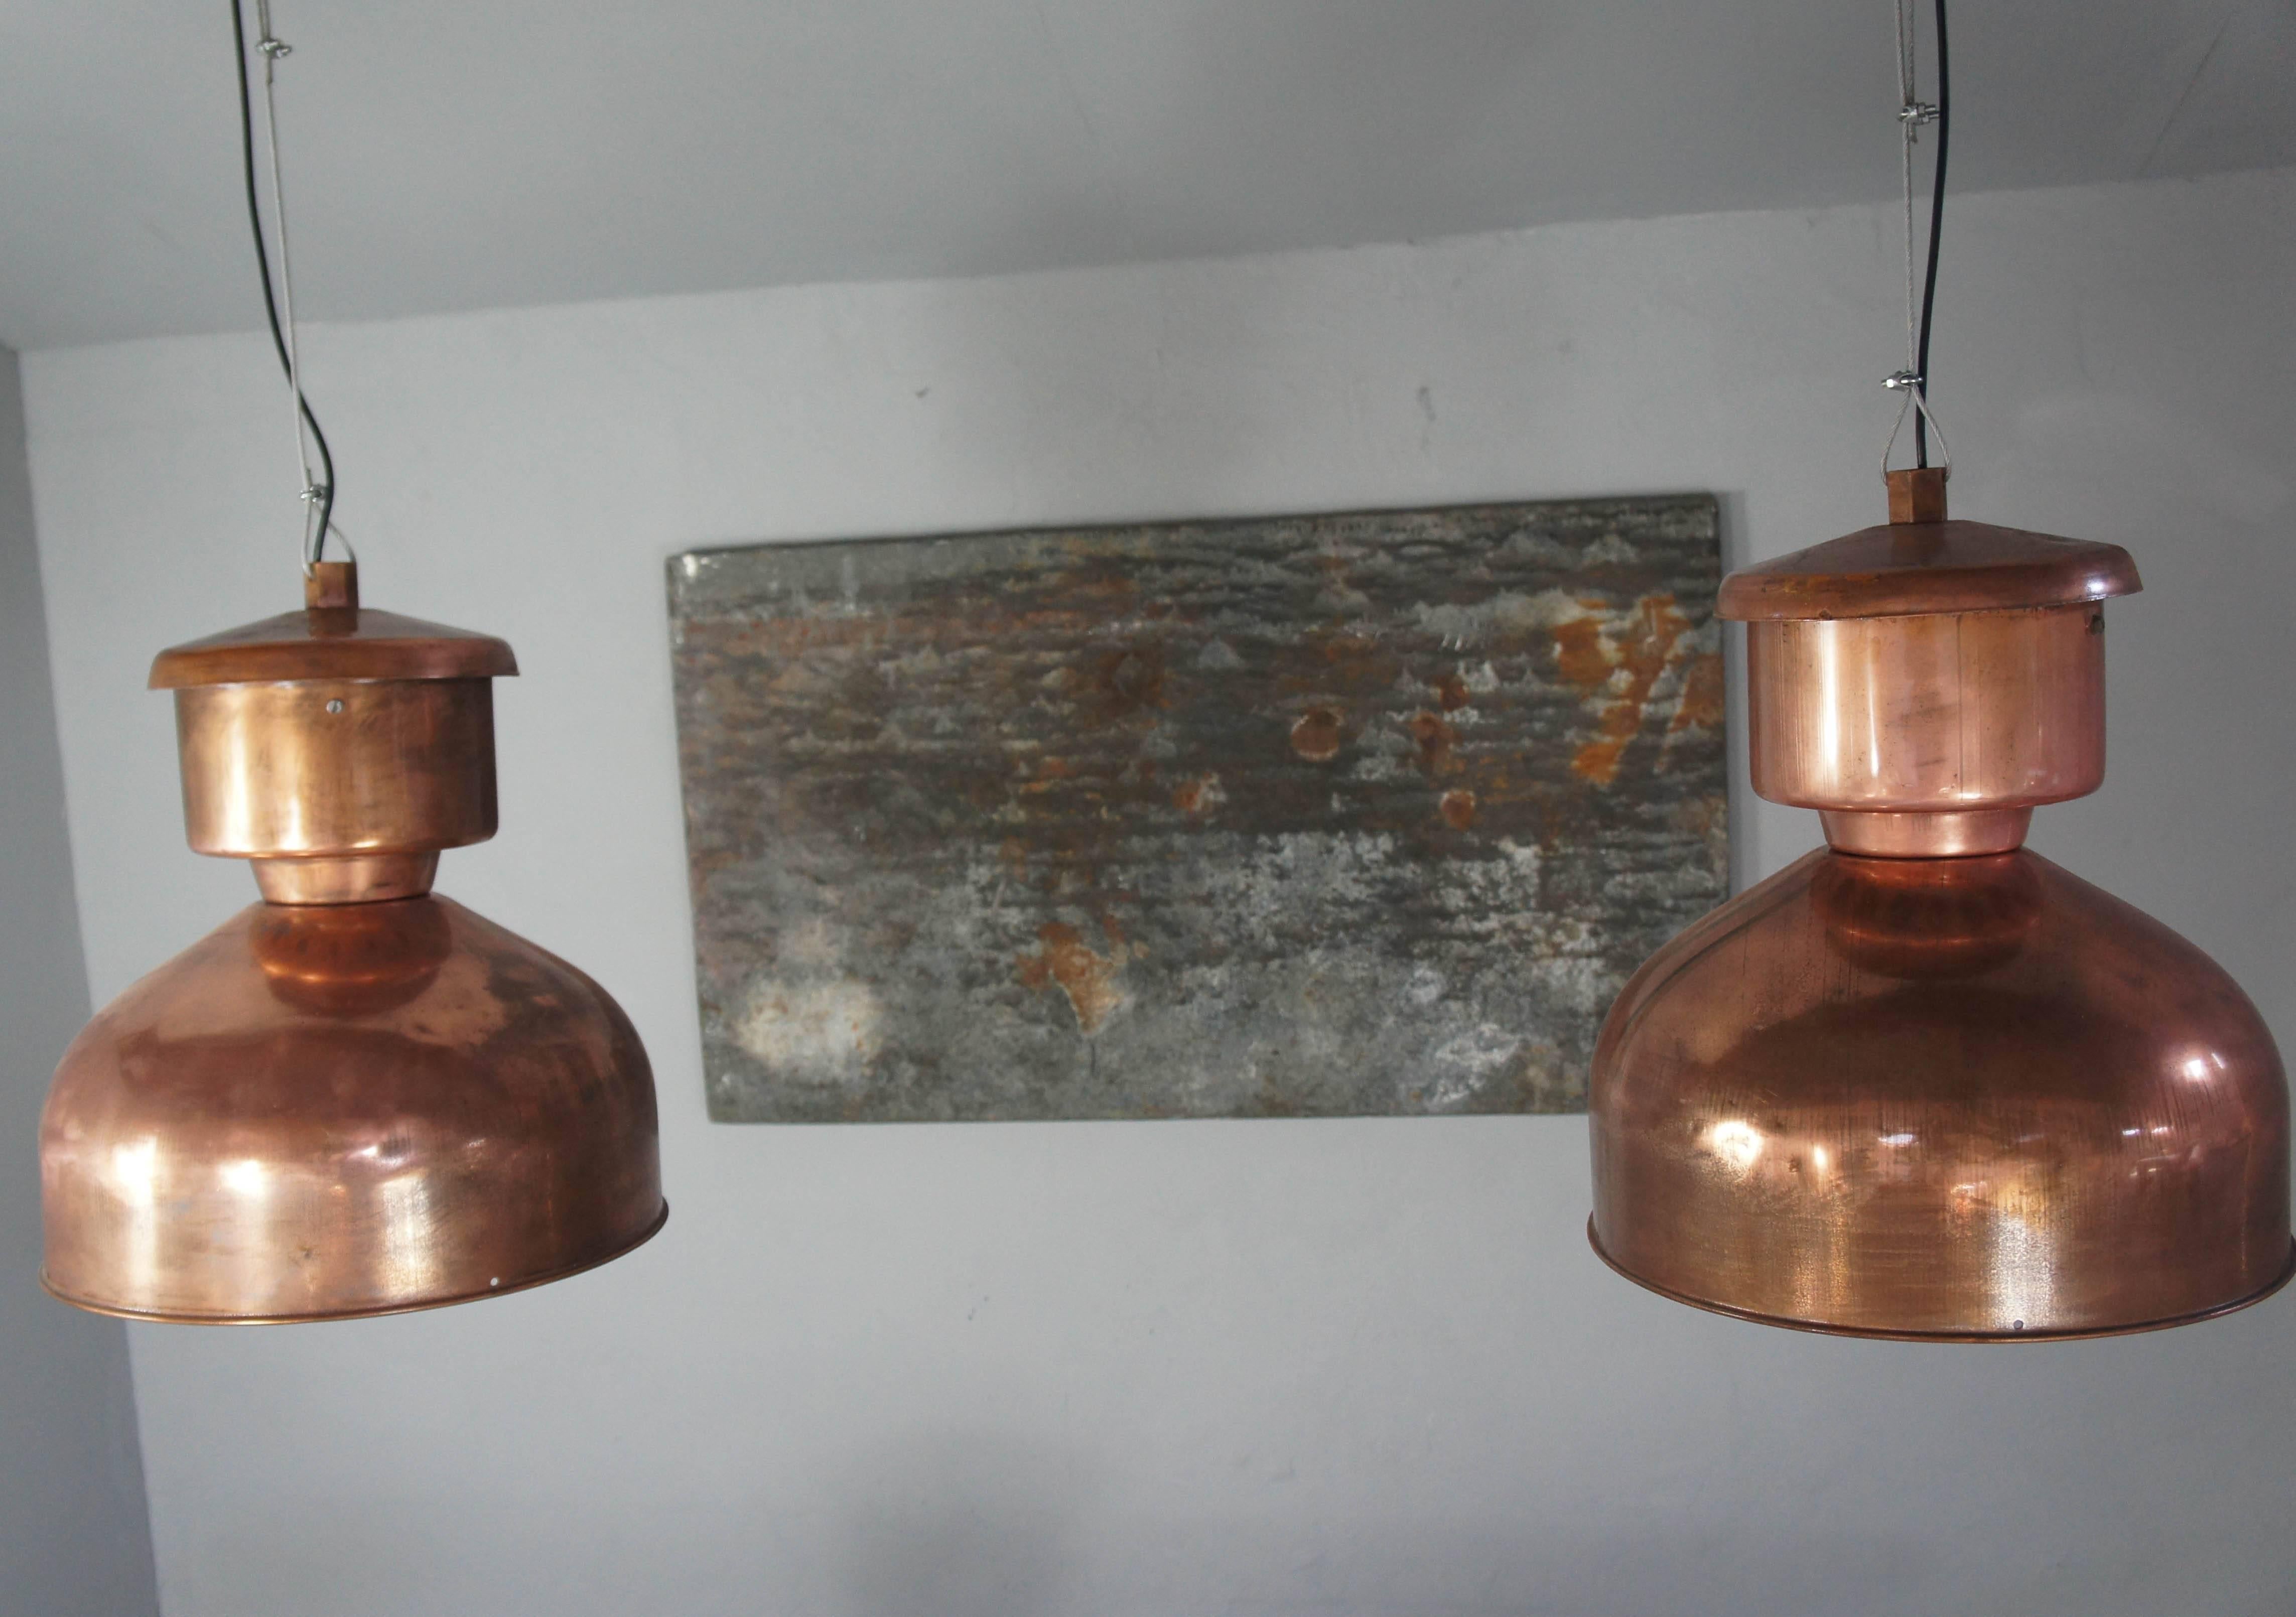 Large pair of original factory copper pendant lights from the Netherlands. Wired and ready to hang.